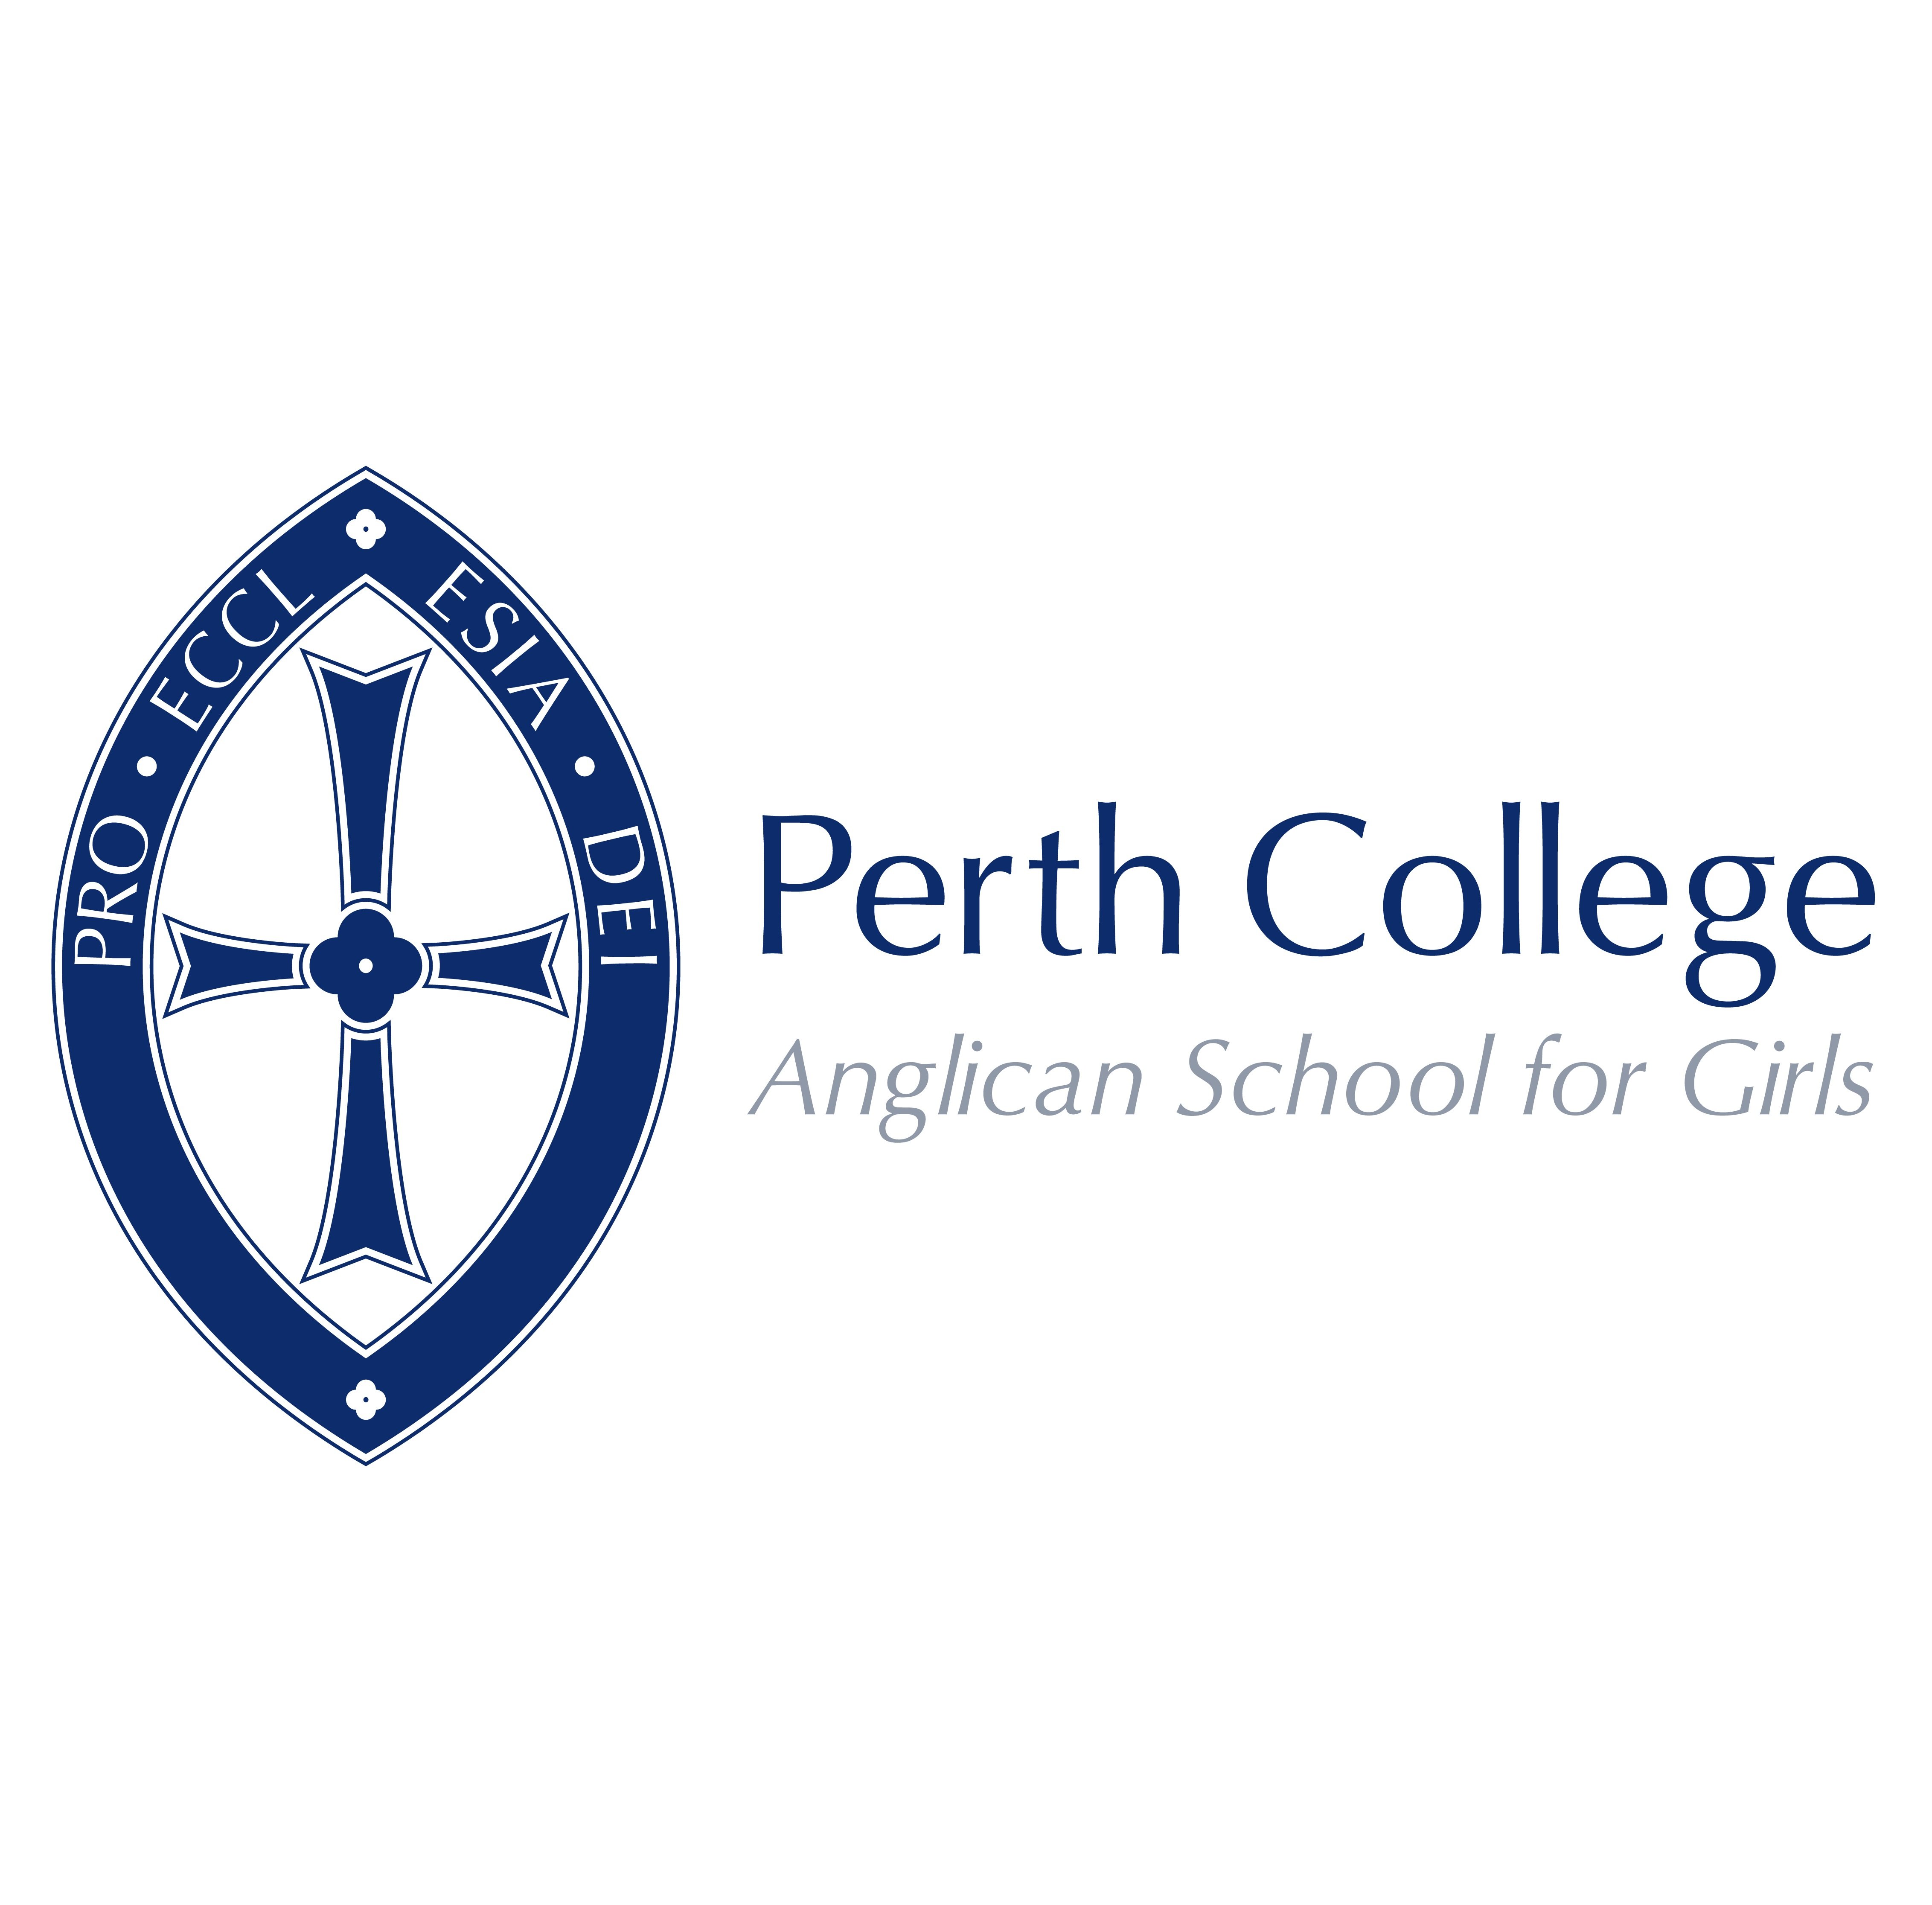 Perth College Anglican School for Girls